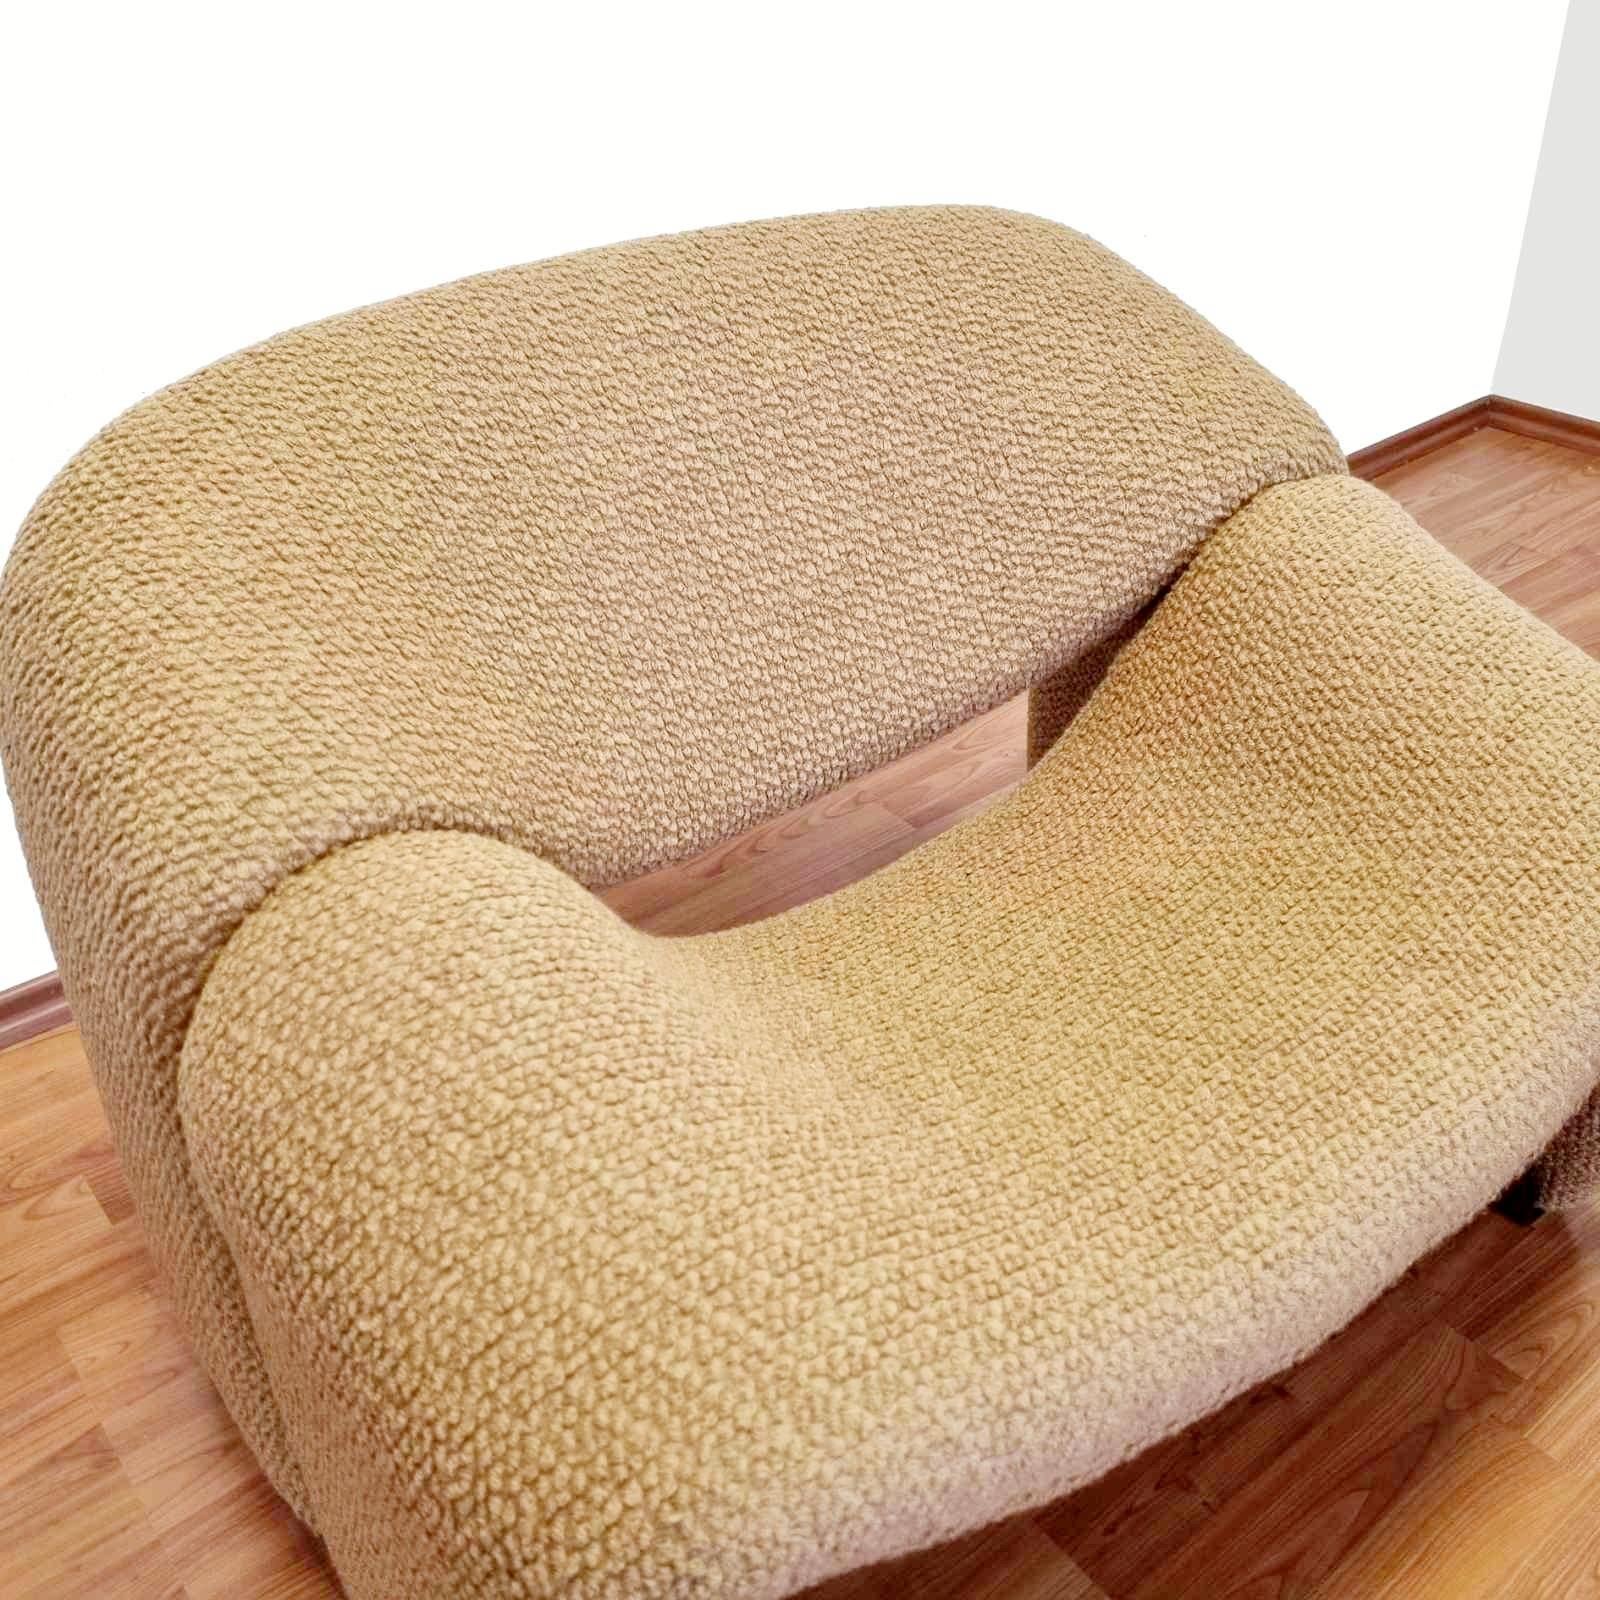 The Groovy chair, or F598, was designed in 1973 by France’s top designer Pierre Paulin for Holland’s most Avant-Garde furniture maker Artifort.
Their compactness combined with great comfort and of course, iconic looks made this chair one of the